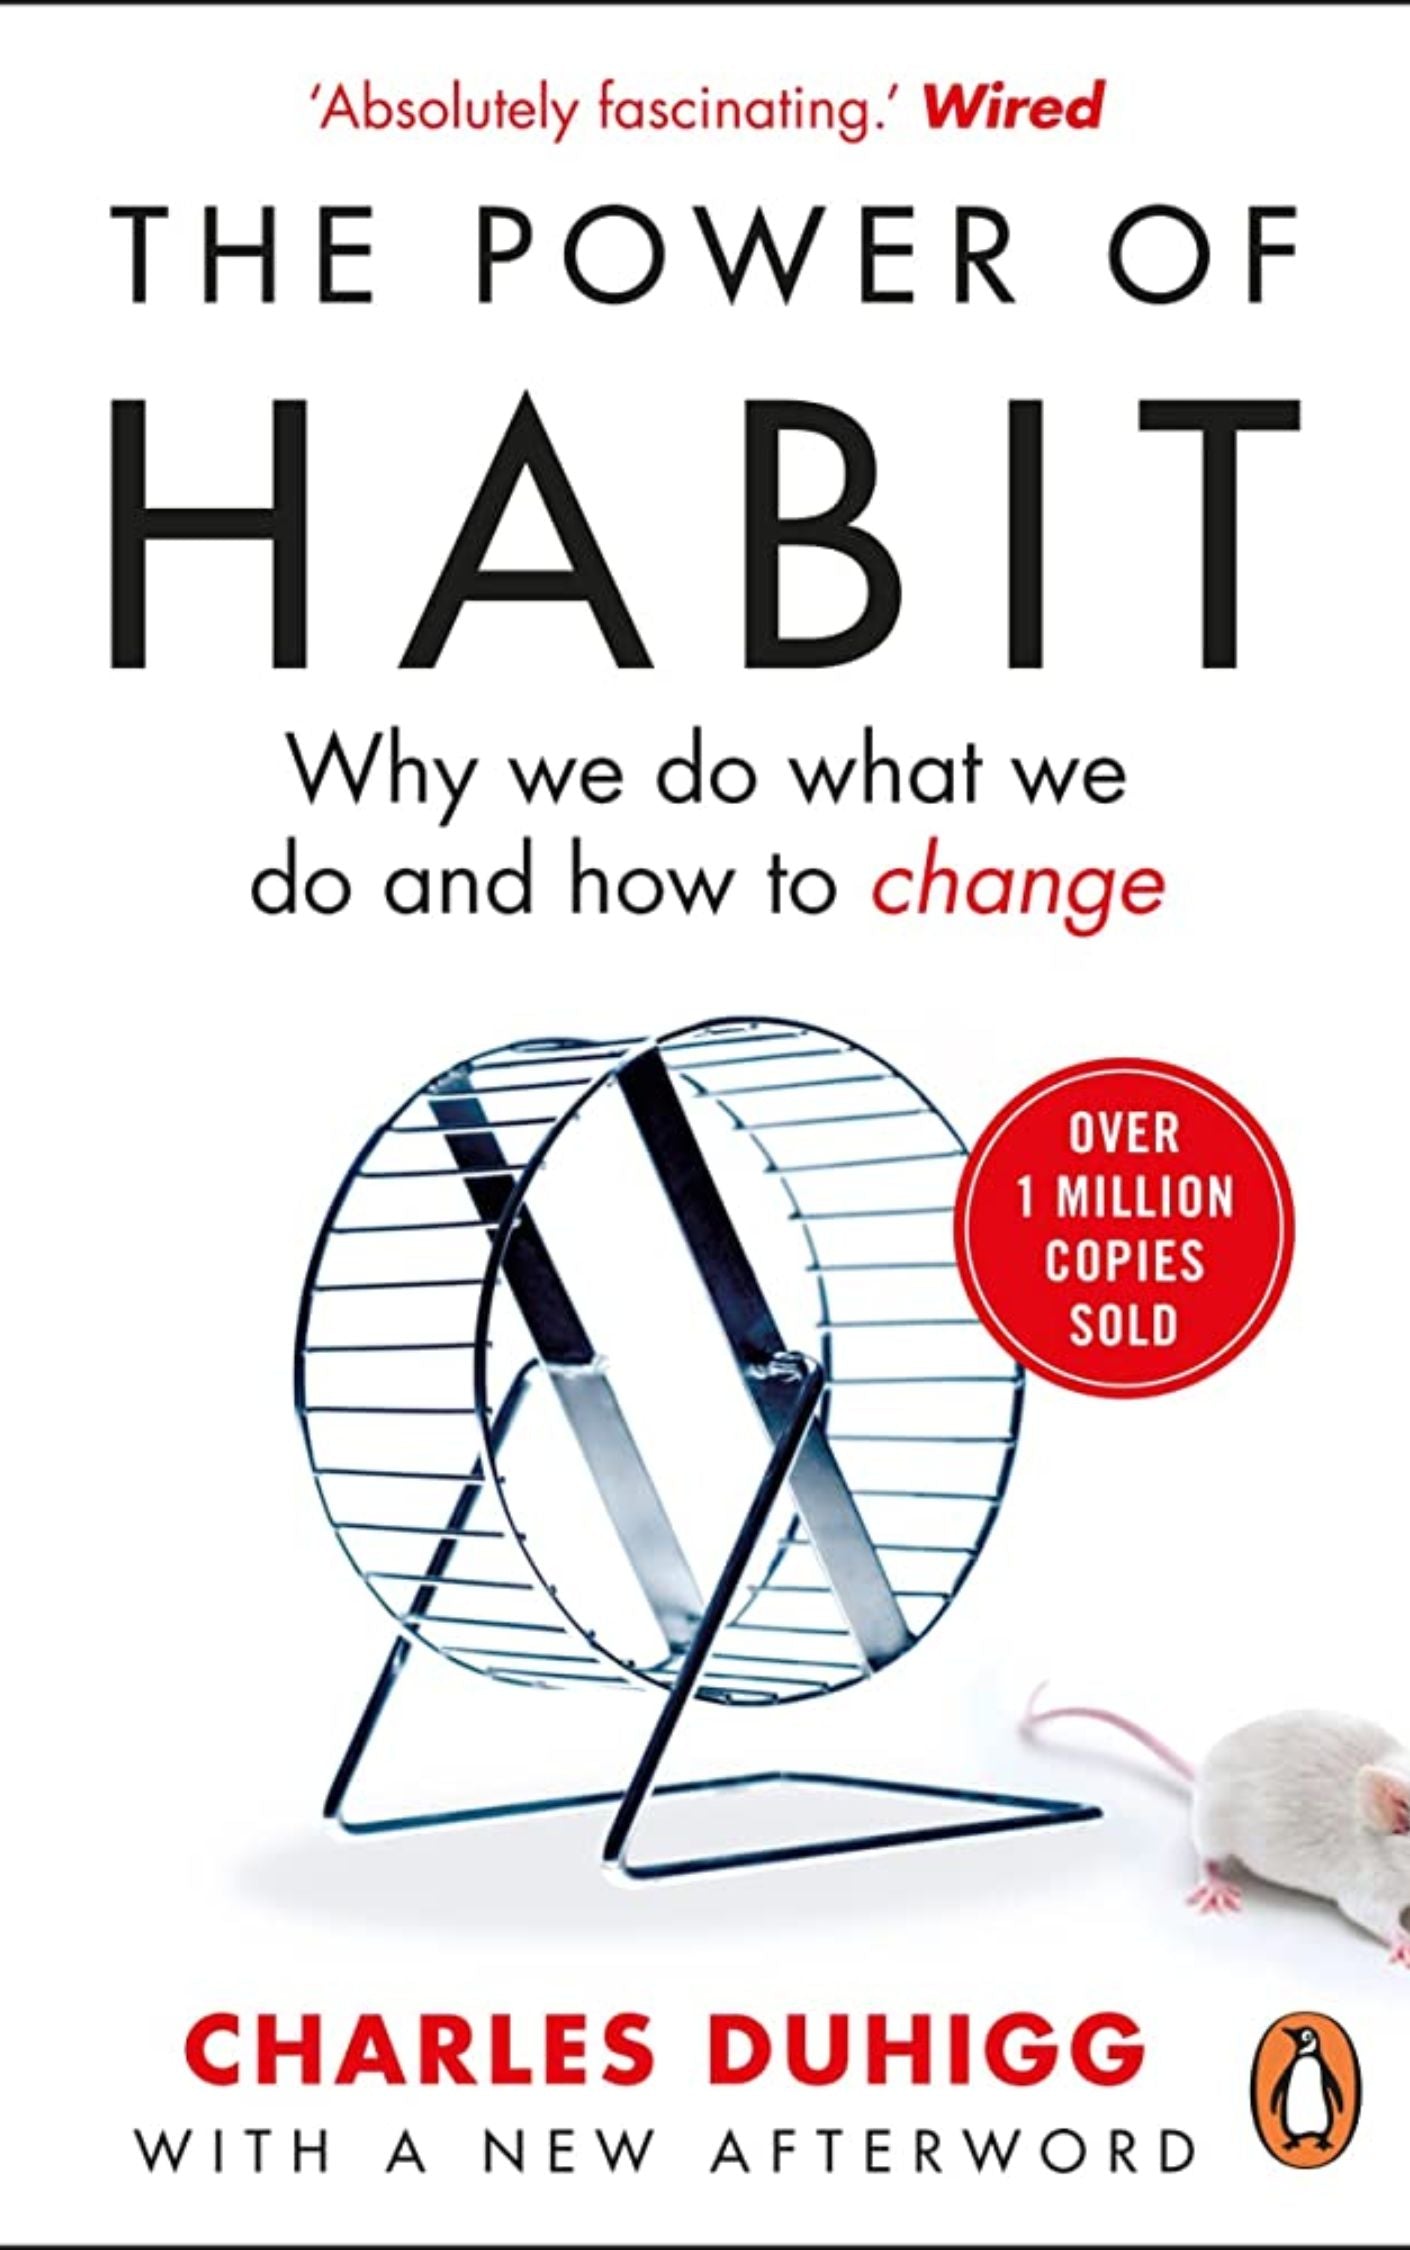 "The Power of Habit" by Charles Duhigg: Books For Women